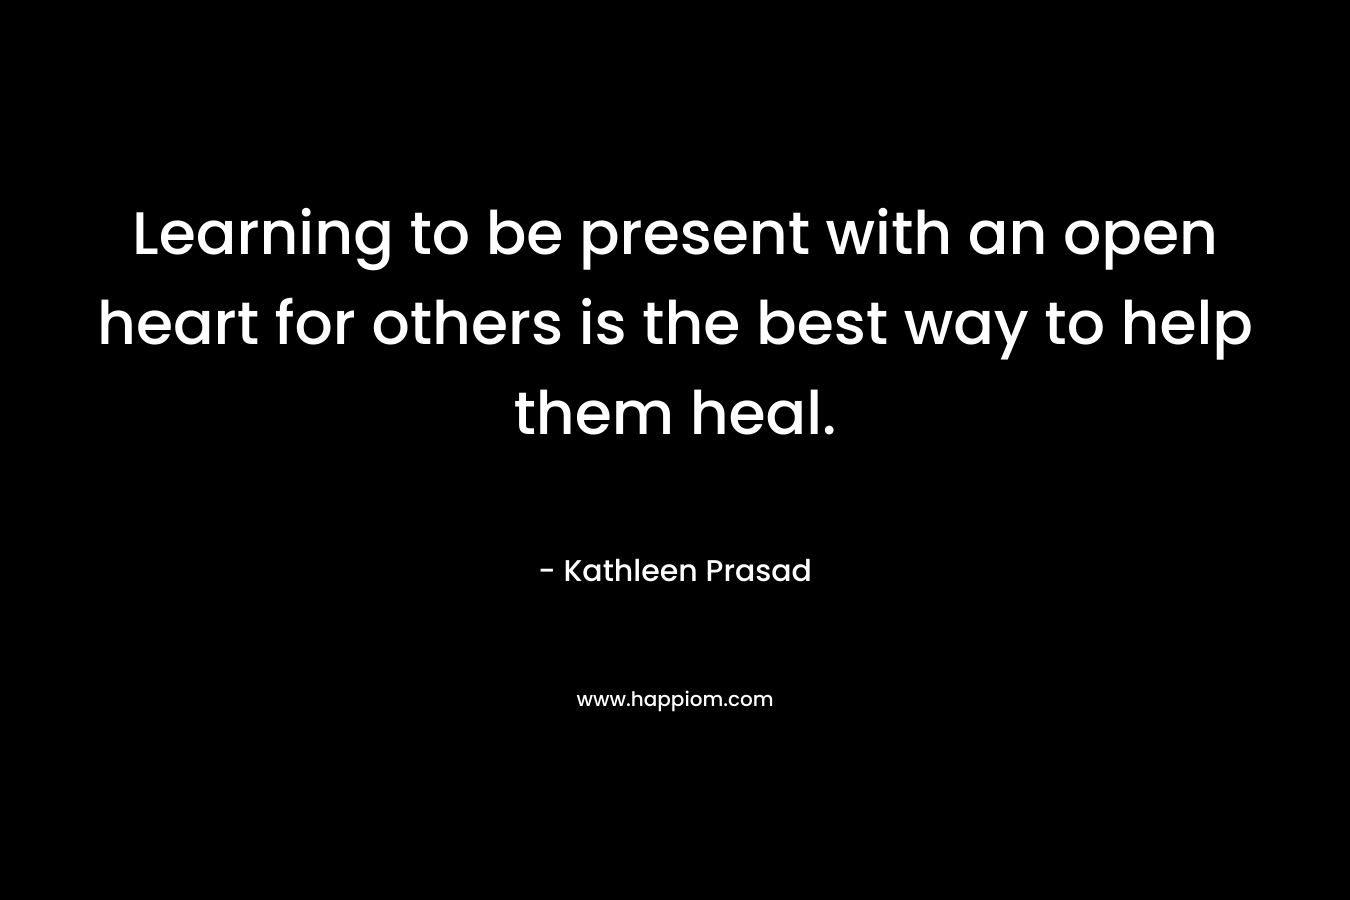 Learning to be present with an open heart for others is the best way to help them heal.